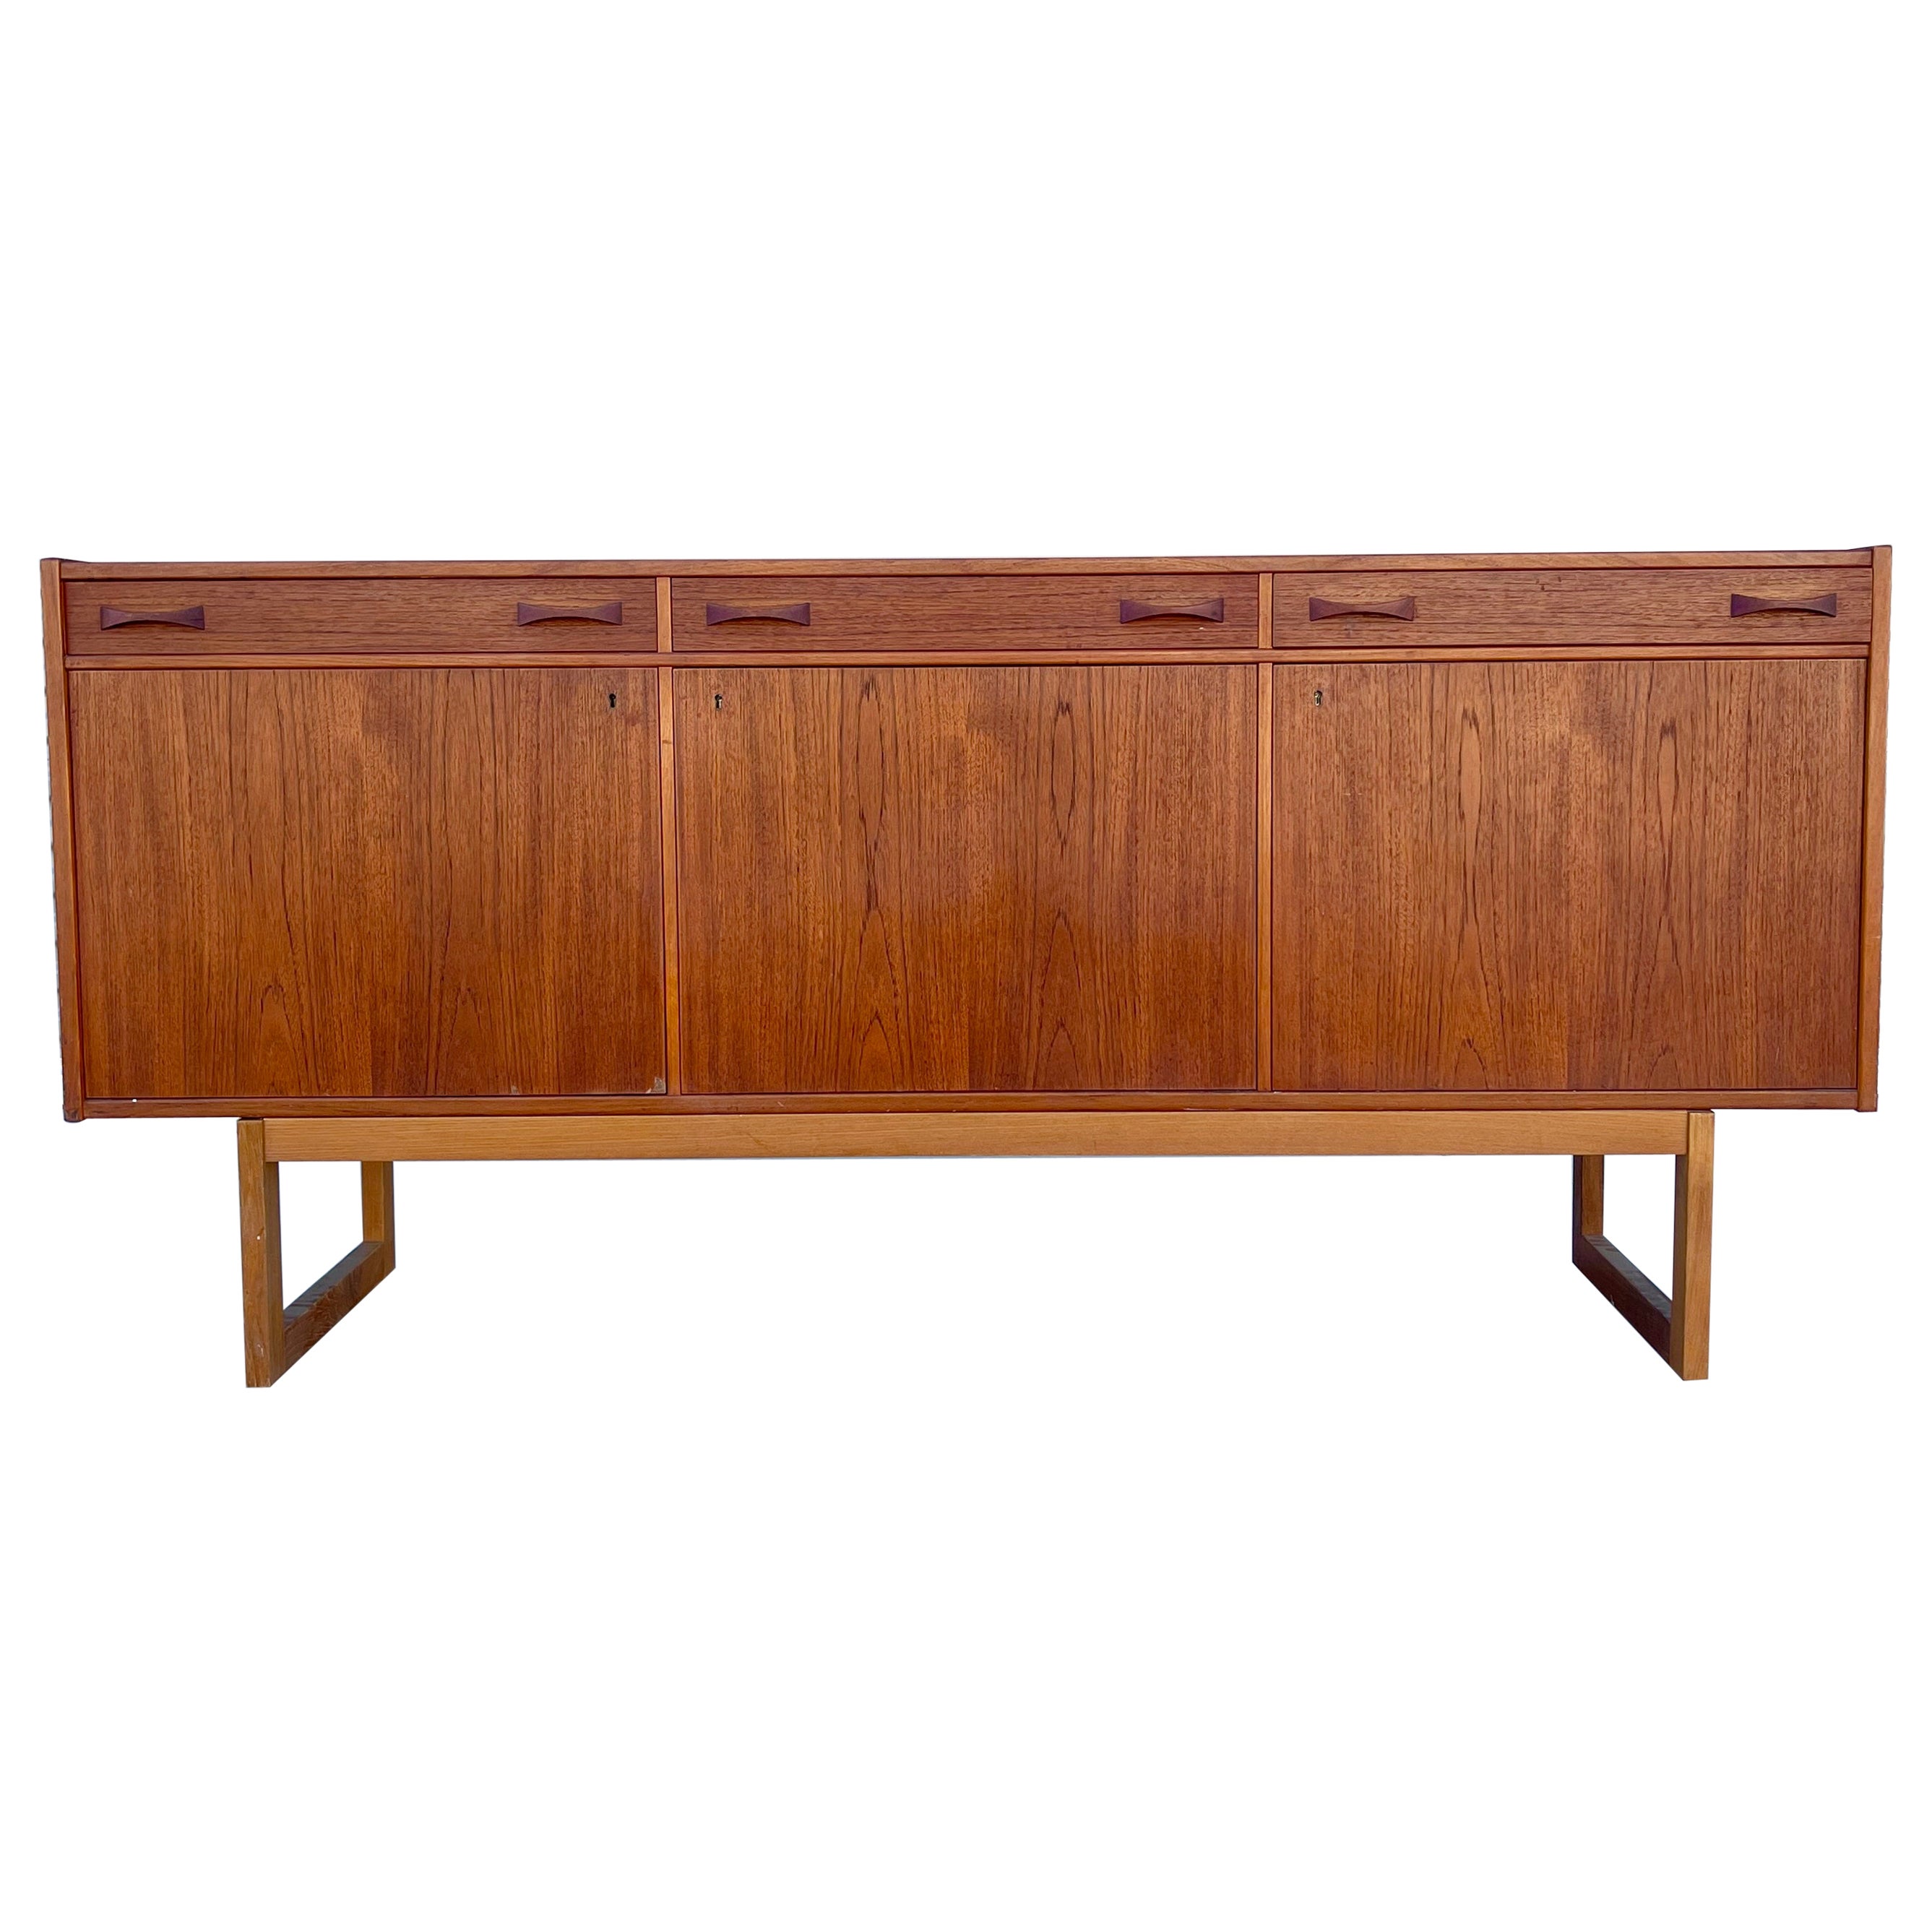 1960s Mid Century Teak Sideboard by Age Olofsson for Ulferts Mobler For Sale